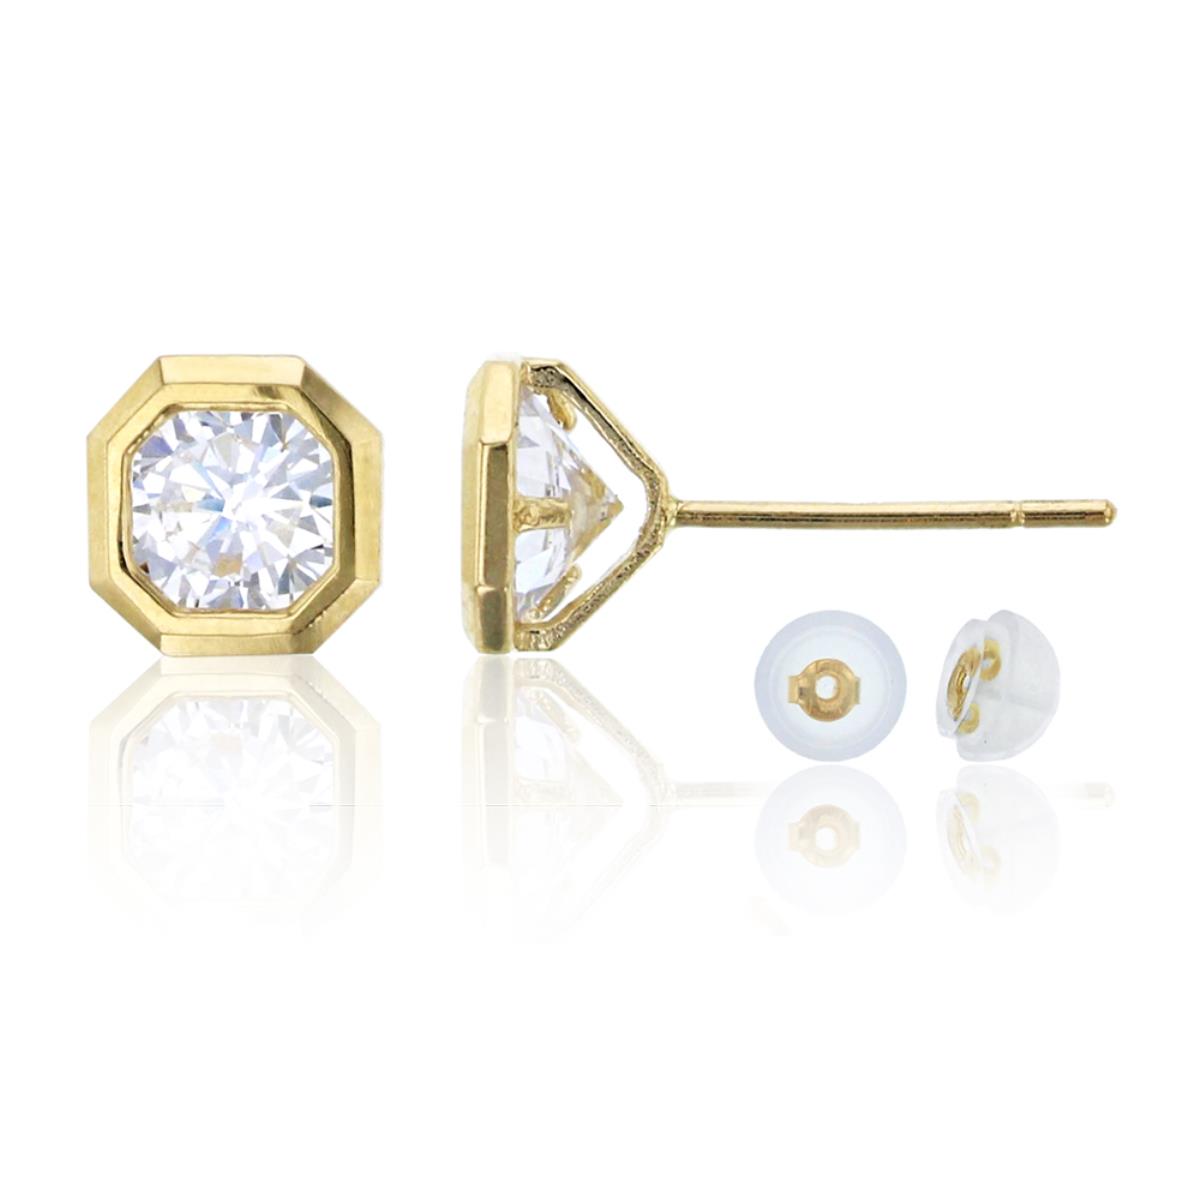 10K Yellow Gold 5mm Round Cut CZ Octagon Shaped Stud Earring & 10K Silicone Back